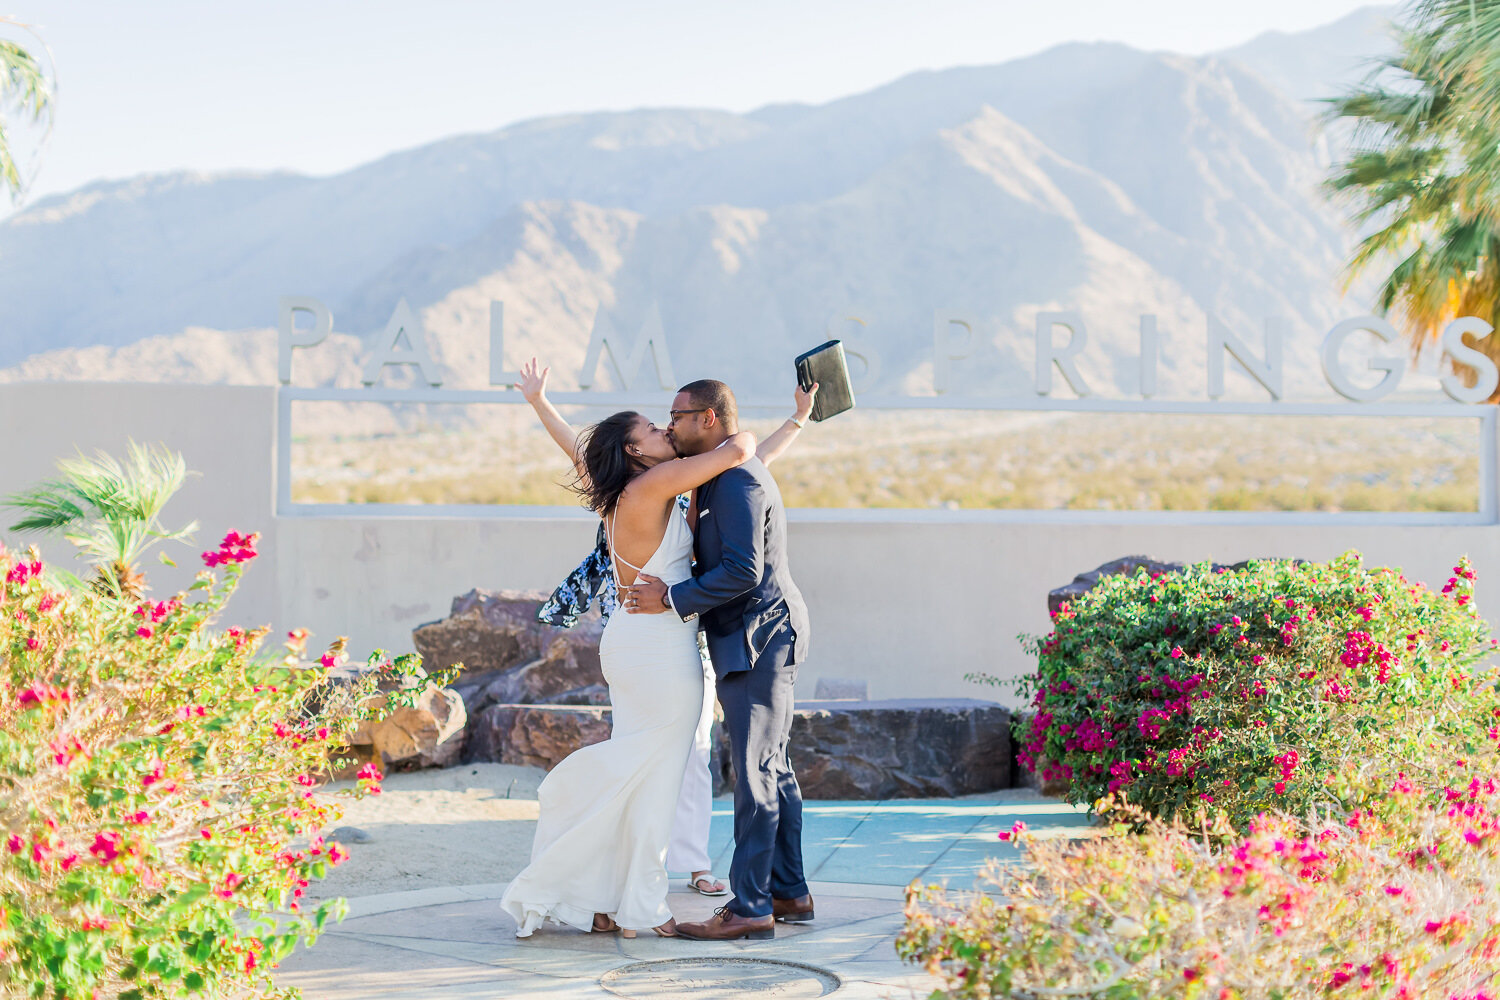 sevelle.elopement.palm.springs.sign.monocle.project-71.jpg